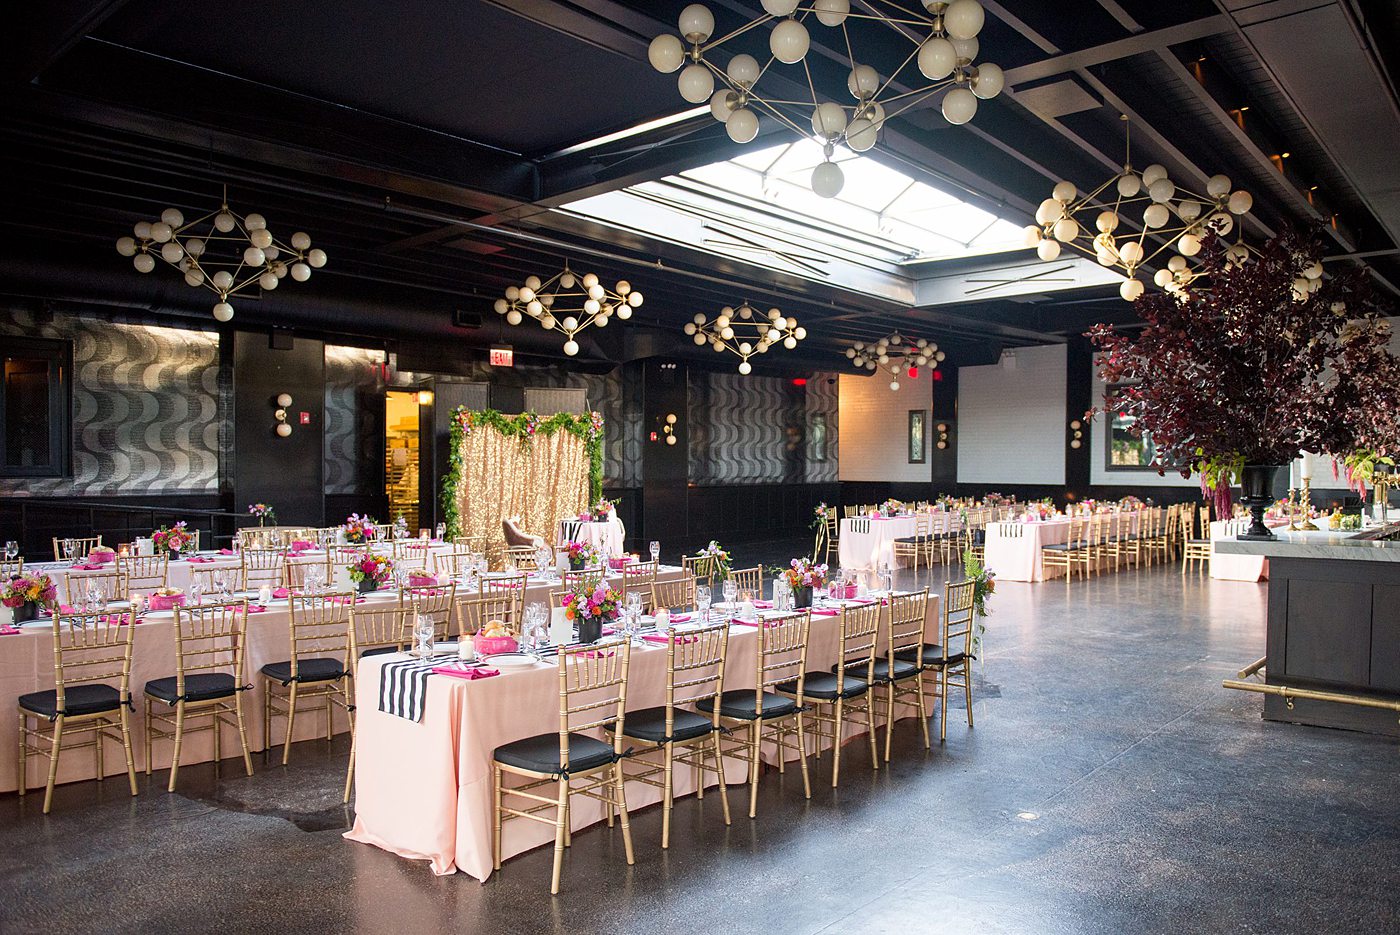 501 Union wedding with photos by Mikkel Paige Photography. The reception in Brooklyn, NY was lined with rectangular tables covered in pink linens, with vibrant flowers by August Sage and Violet and planning by Ashley Chamblin Events.